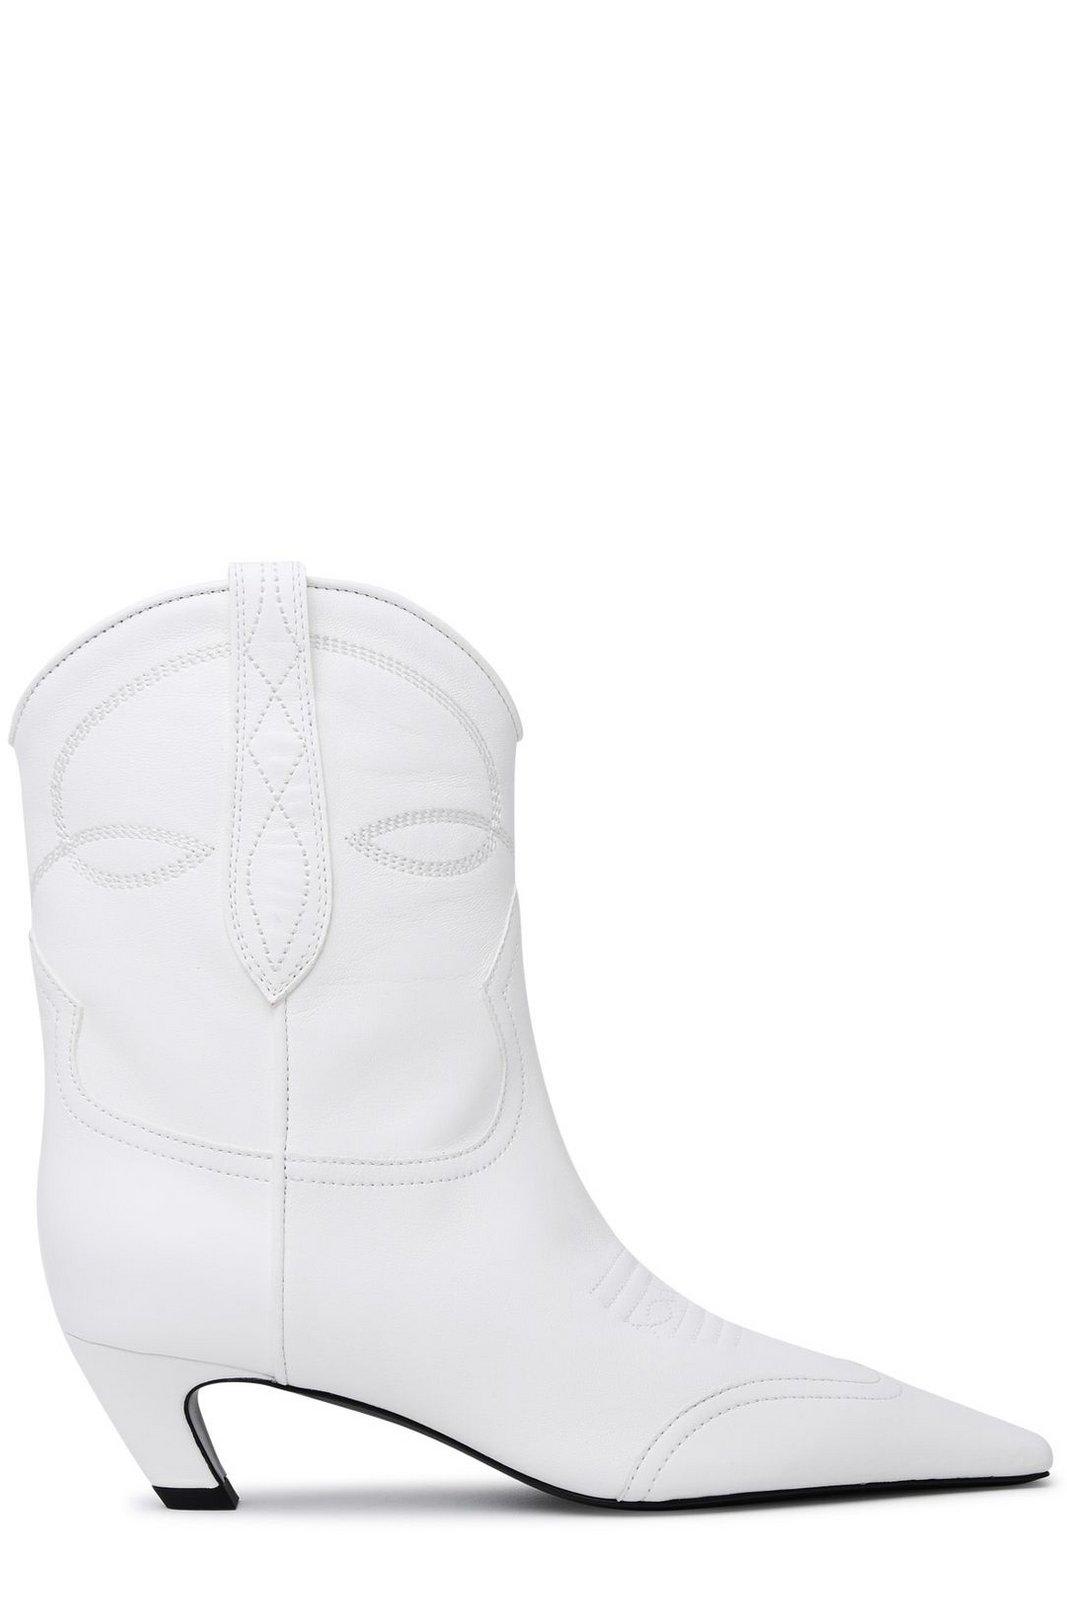 Khaite Embroidered Pointy-toe Cowboy Boots